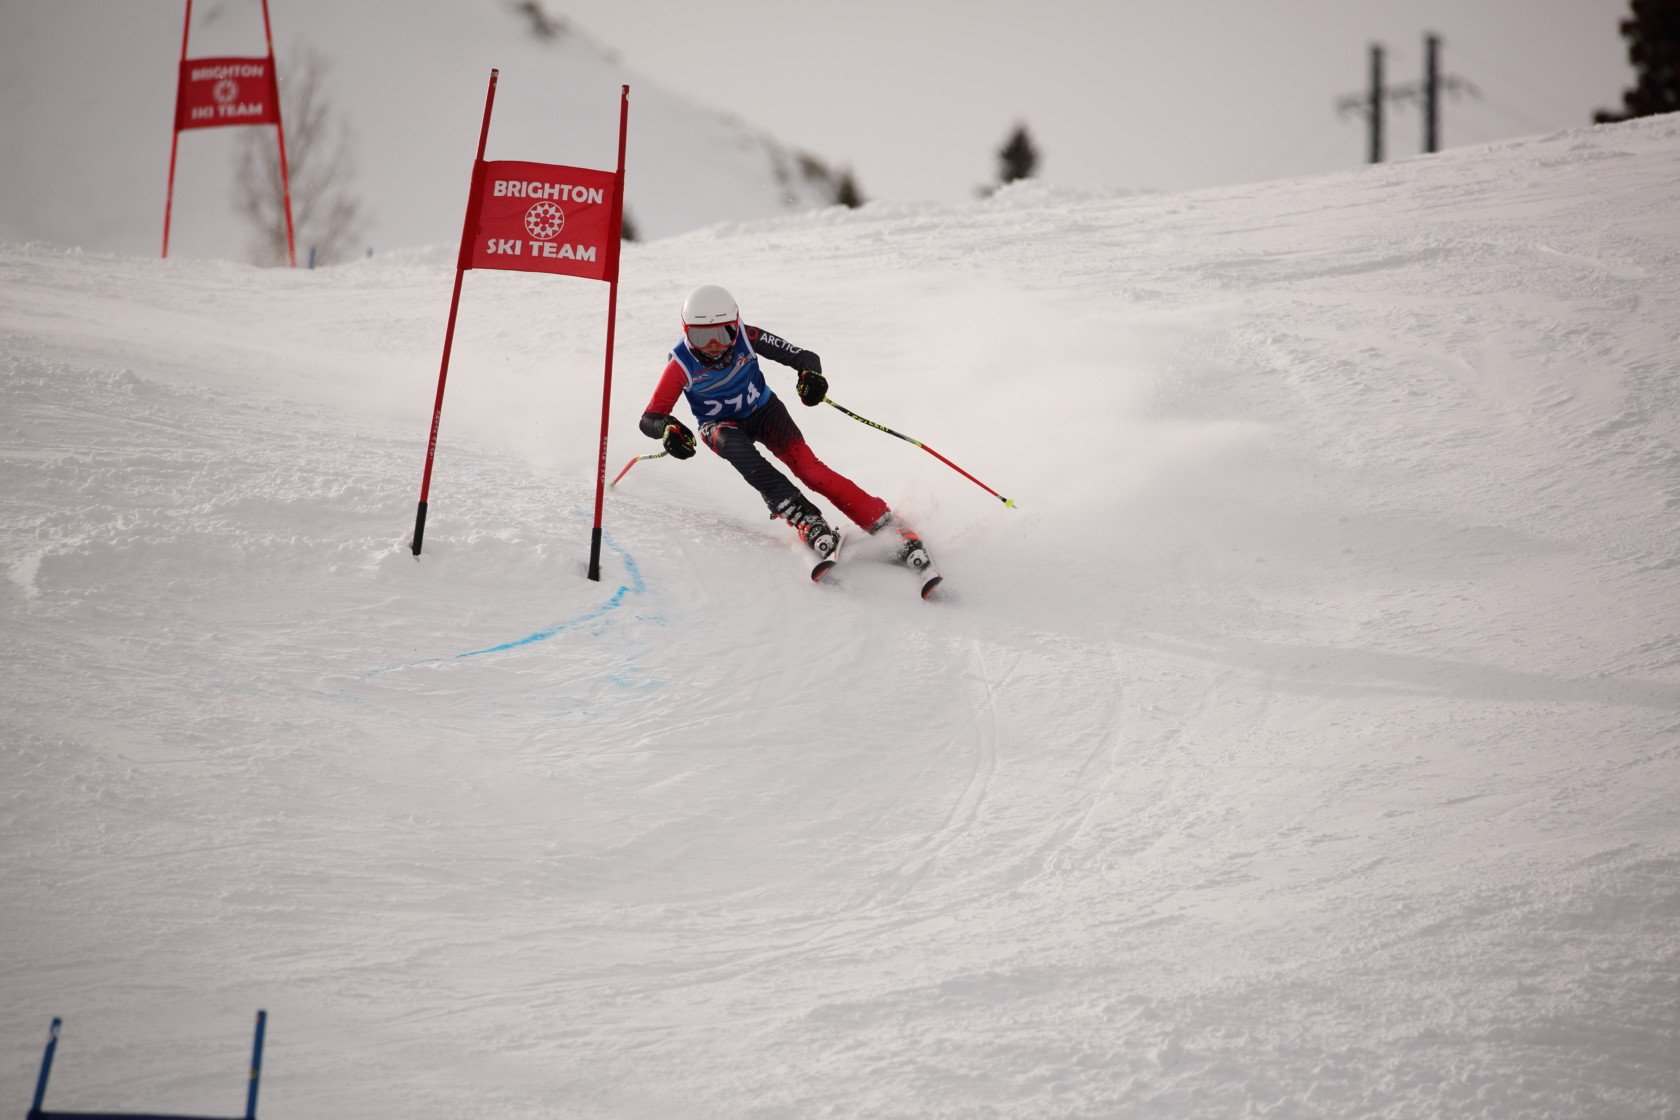 U12 boy Connor Stone in his Cup GS Speed Suit from Arctica